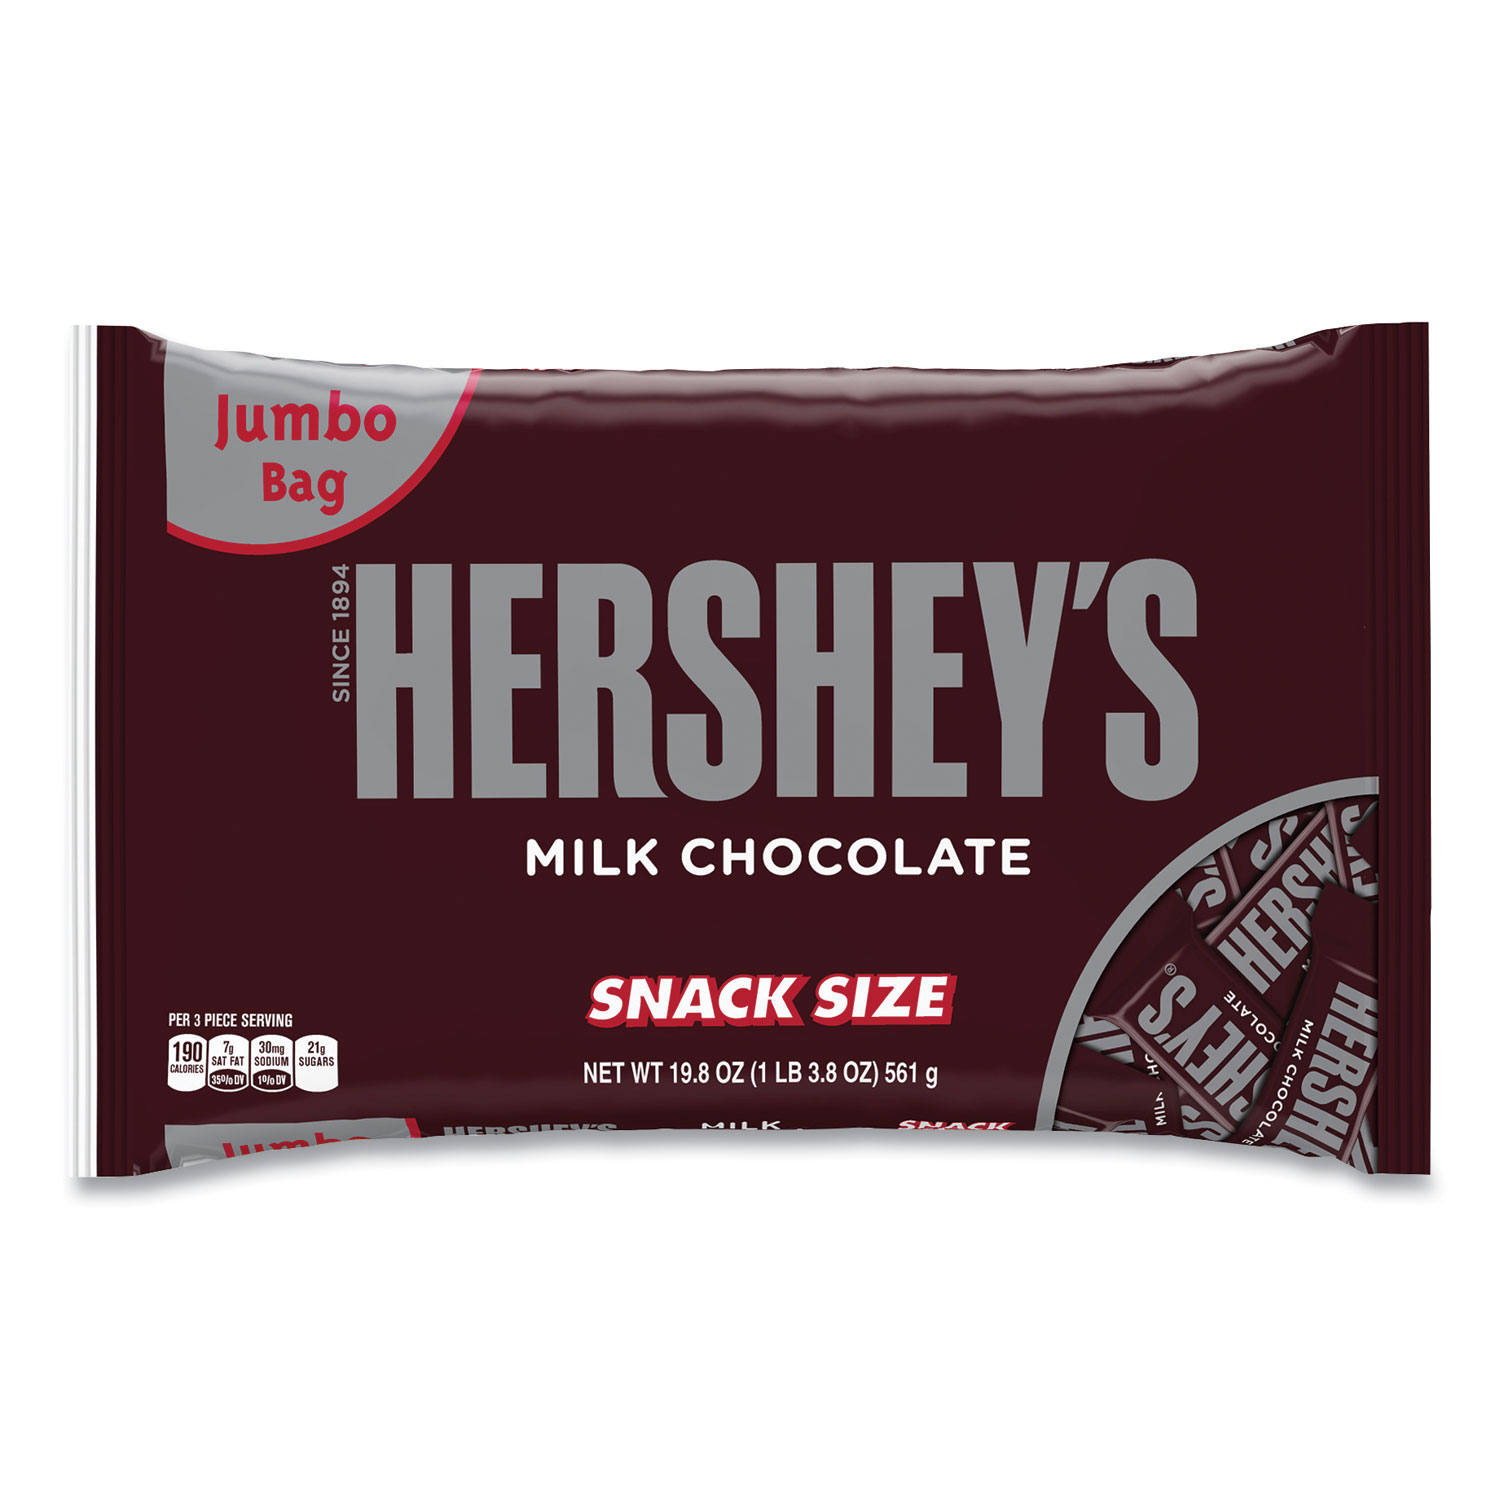  Hershey's 7054 Snack Size Bars, Milk Chocolate, 19.8 oz Bag, Free Delivery in 1-4 Business Days (GRR24600010) 